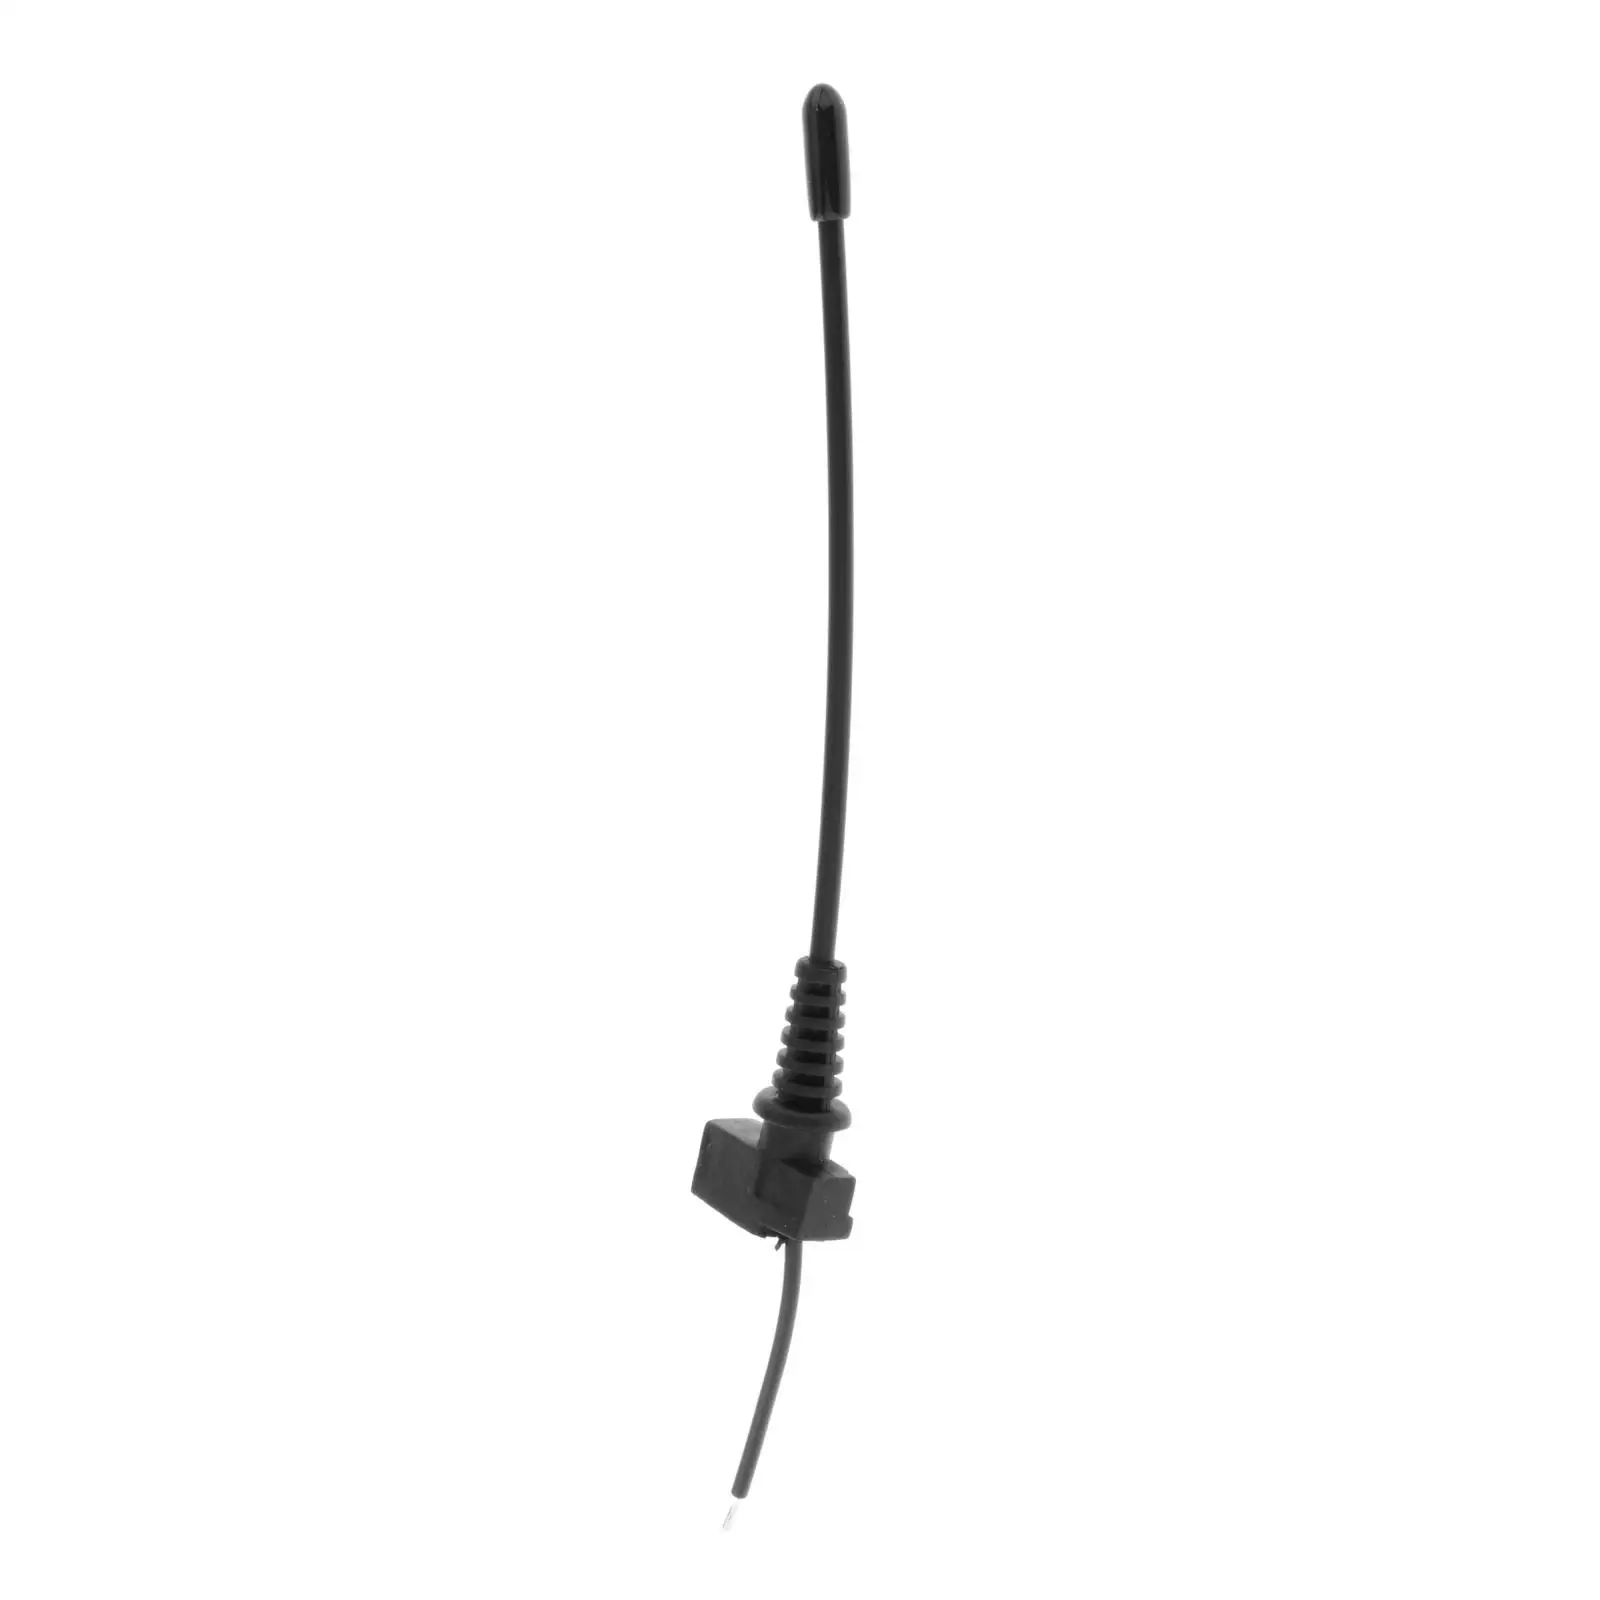 Wireless Mic Receiver Antenna Stable Signal Bodypack Microphone Antenna for EW100G2 100G3 Lapel Mic Repair Replaces Accessory